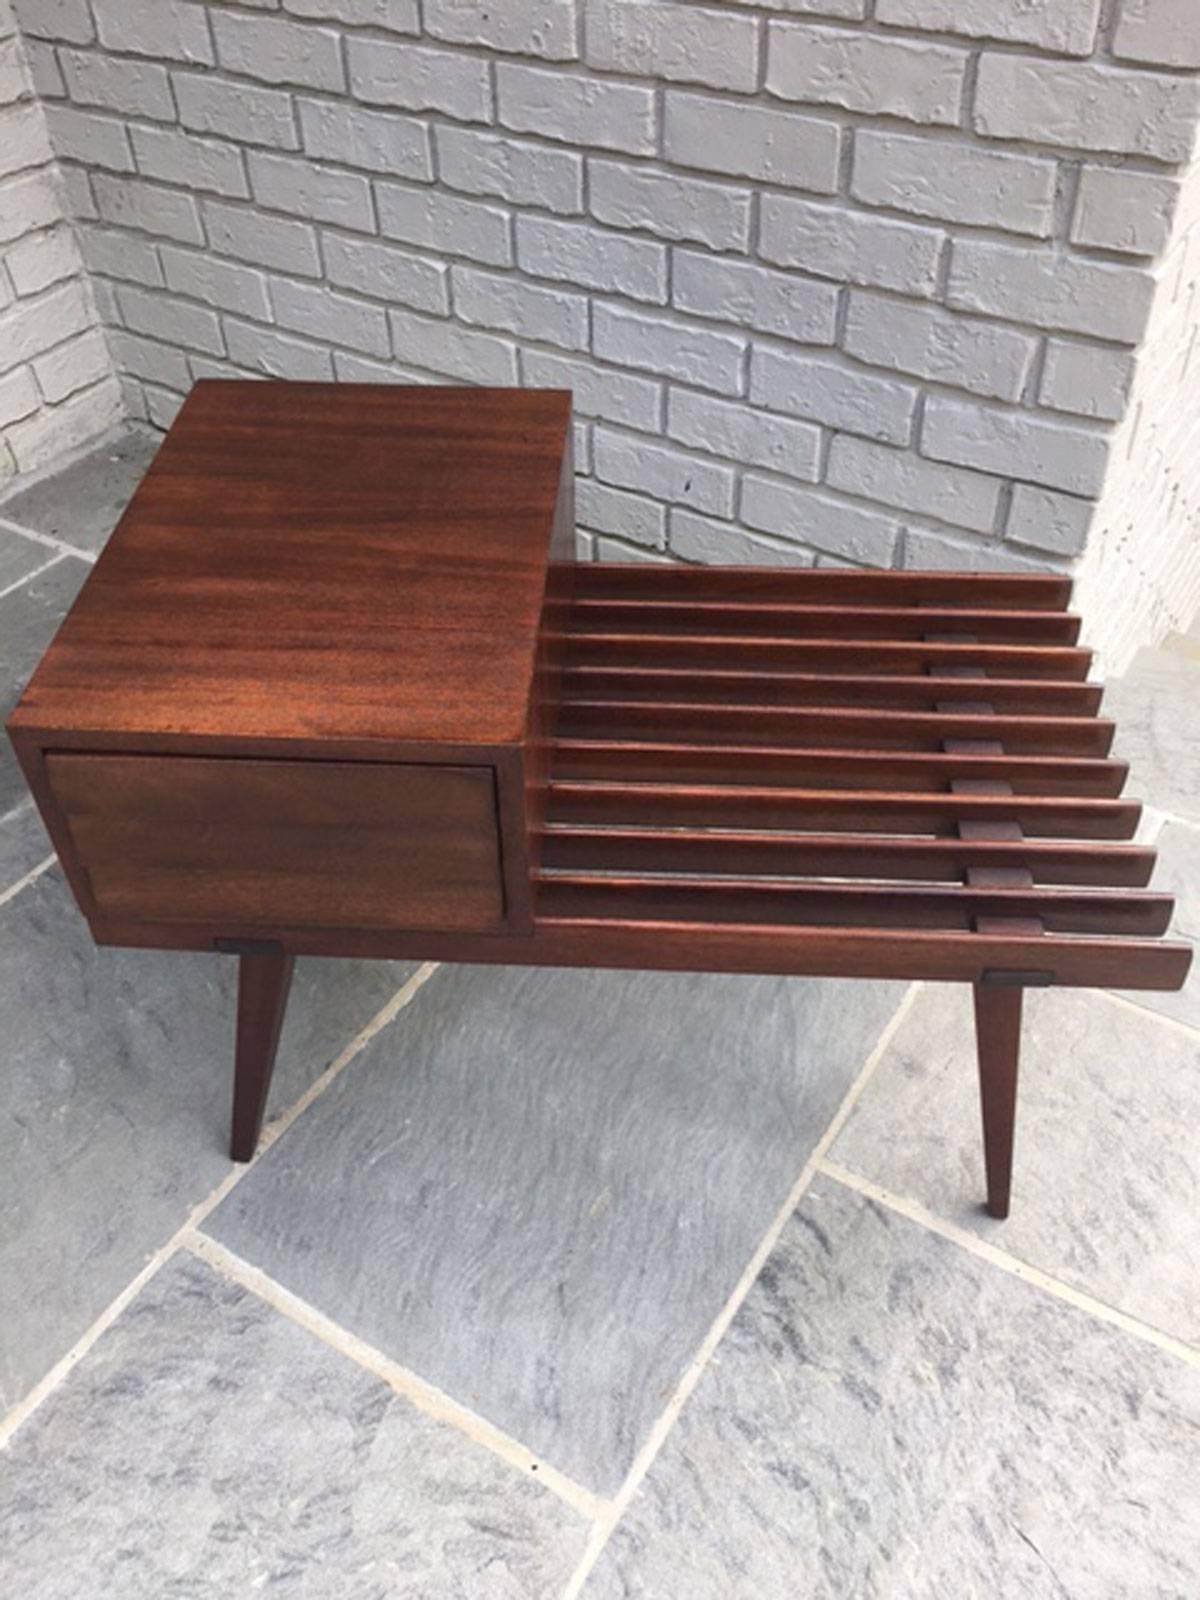 1960s side slat table or telephone table by Founders in mahogany. Professionally restored. The drawer has three angled pulls to allow access to open the drawer and the drawer is finished the same on both sides and can be slid open to either side.